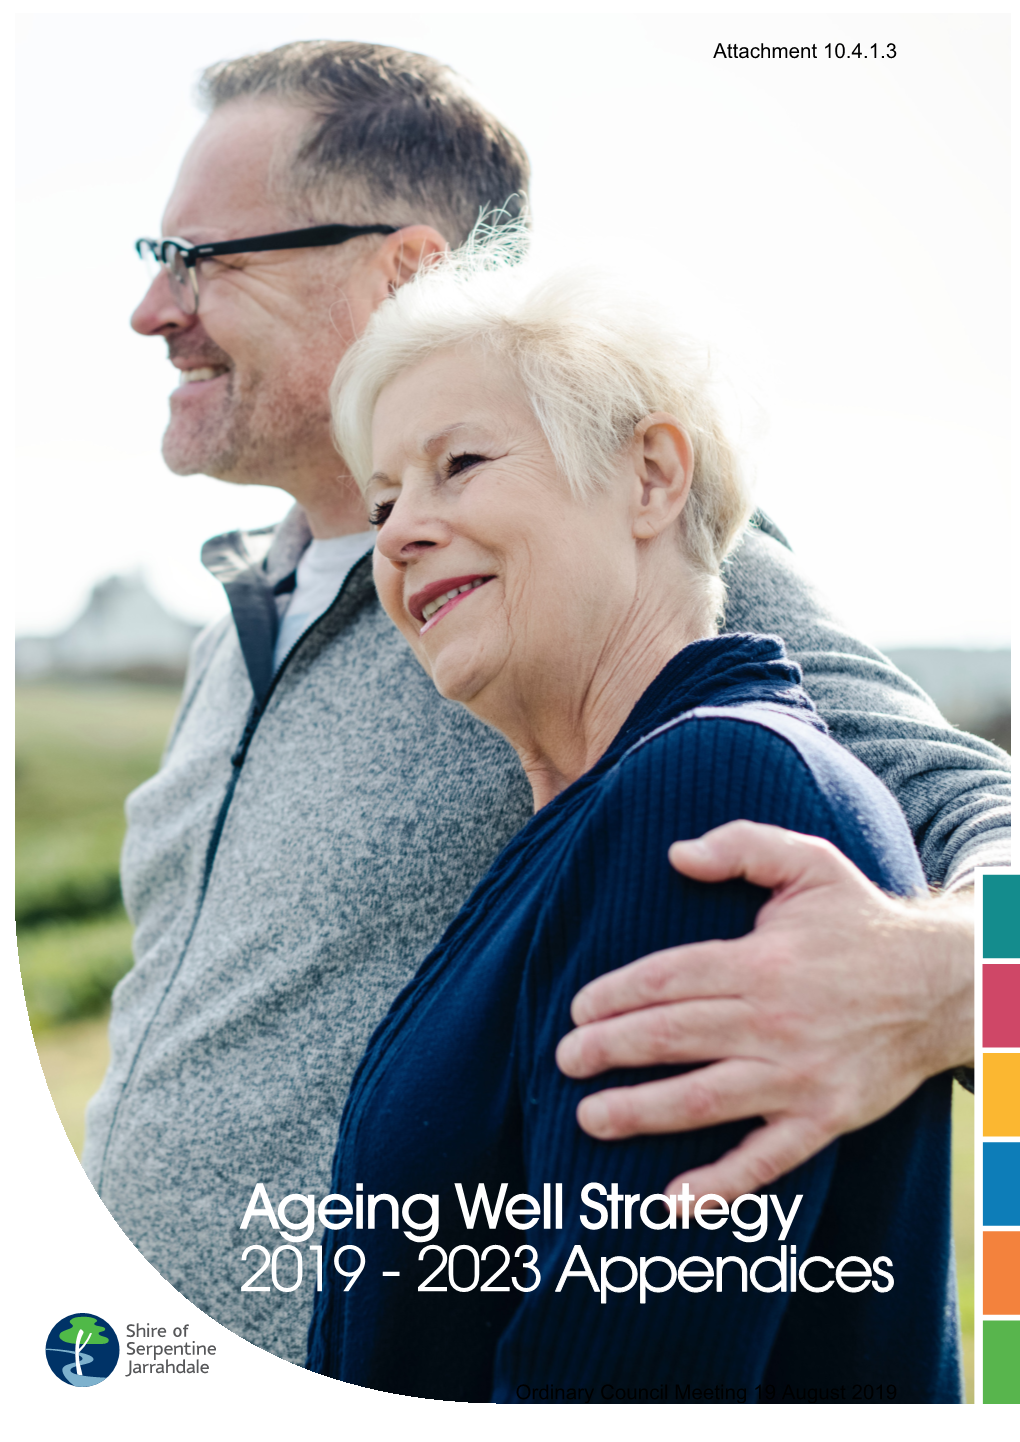 Ageing Well Strategy 2019 - 2023 Appendices